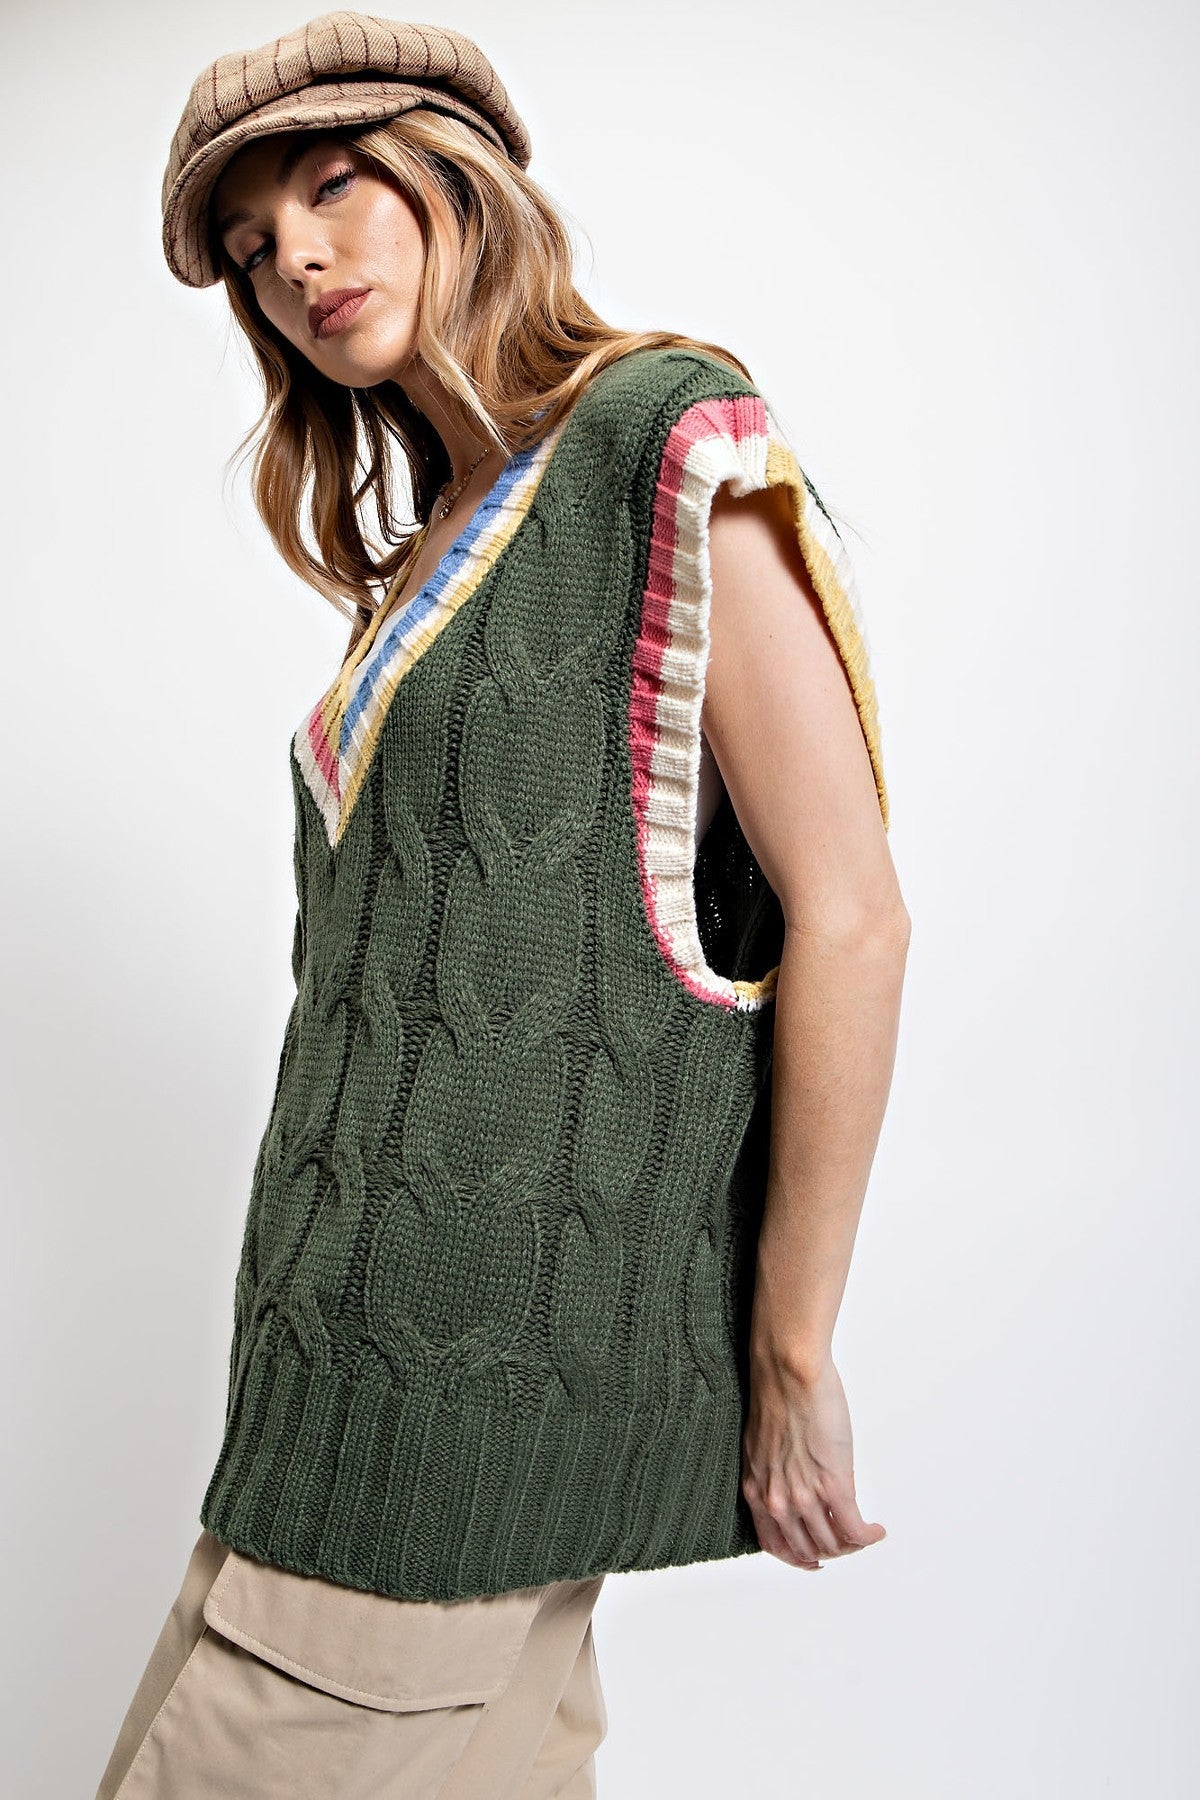 Multi Color Knitted Sweater Vest - Tigbuls Variety Fashion